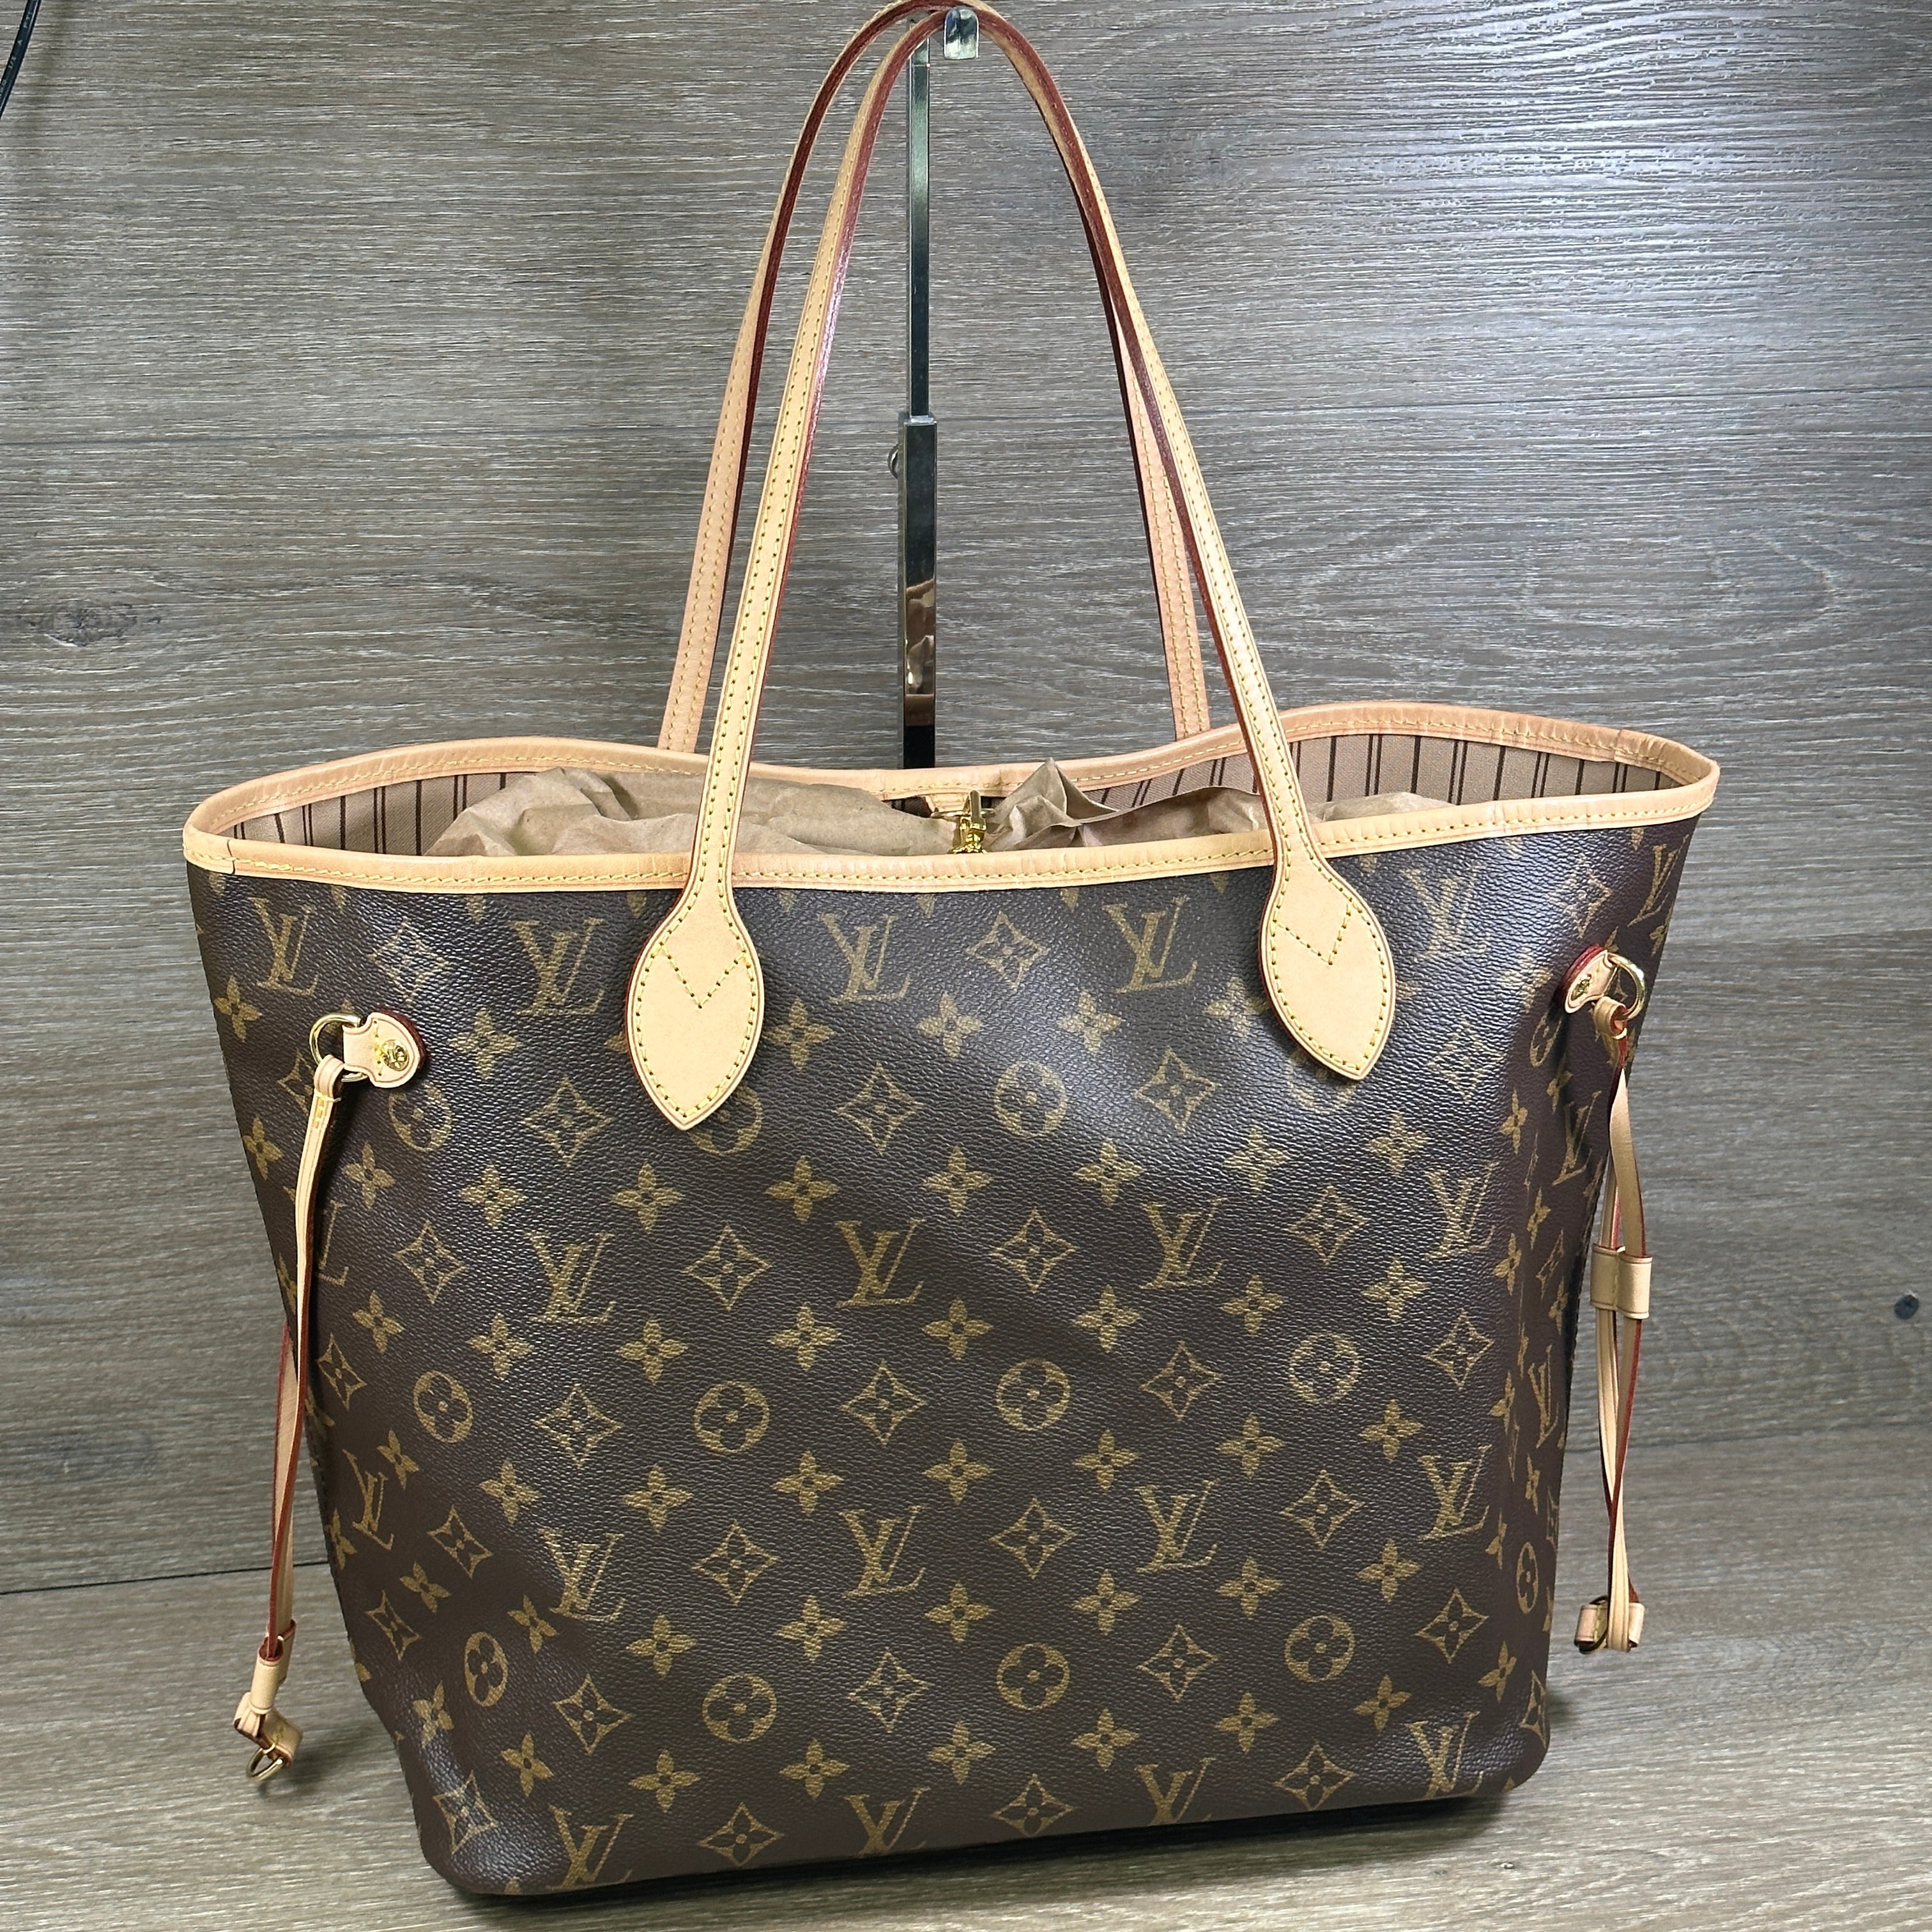 New and used Louis Vuitton Neverfull Bags for sale, Facebook Marketplace